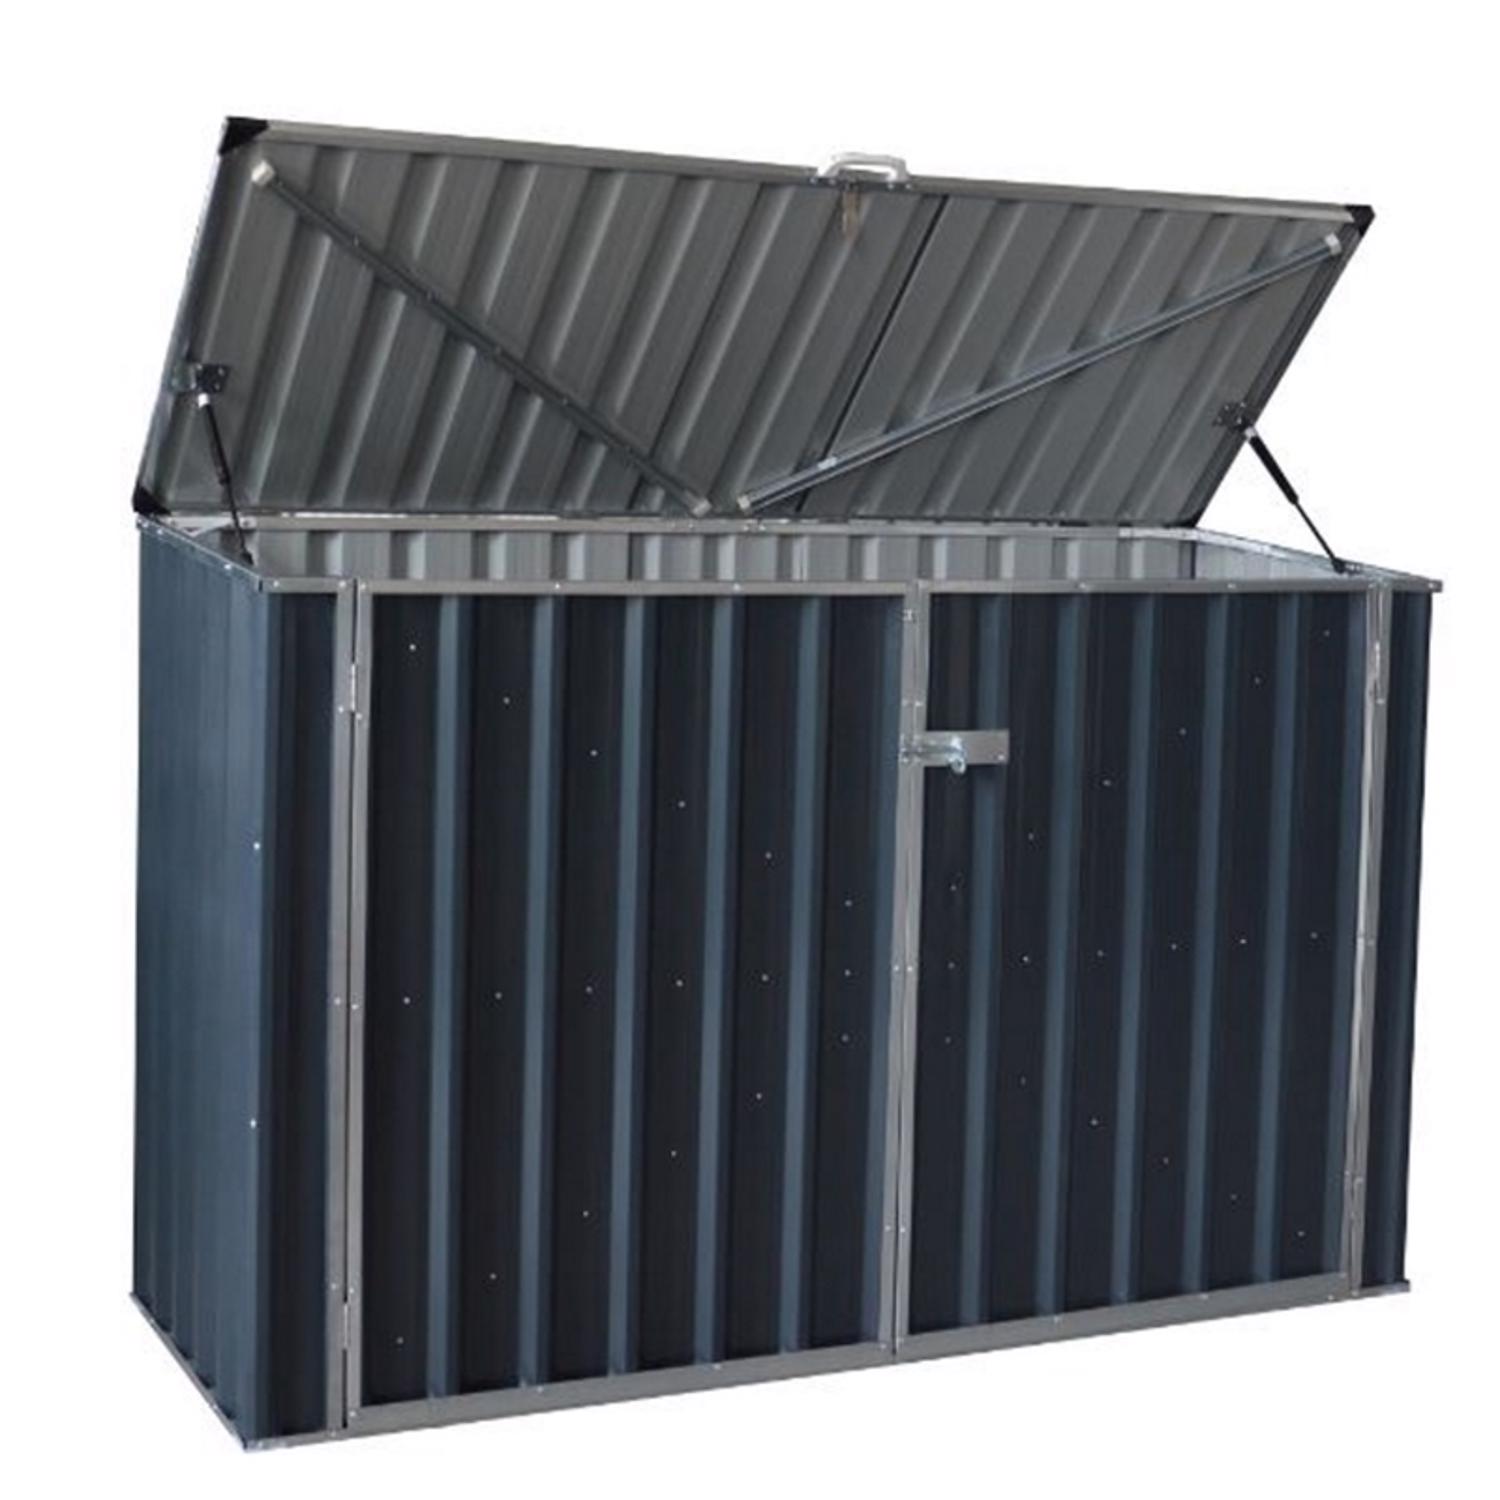 Build-Well 6 ft. x 3 ft. Metal Horizontal Modern Storage Shed without Floor Kit -  SW0603FDH-GY